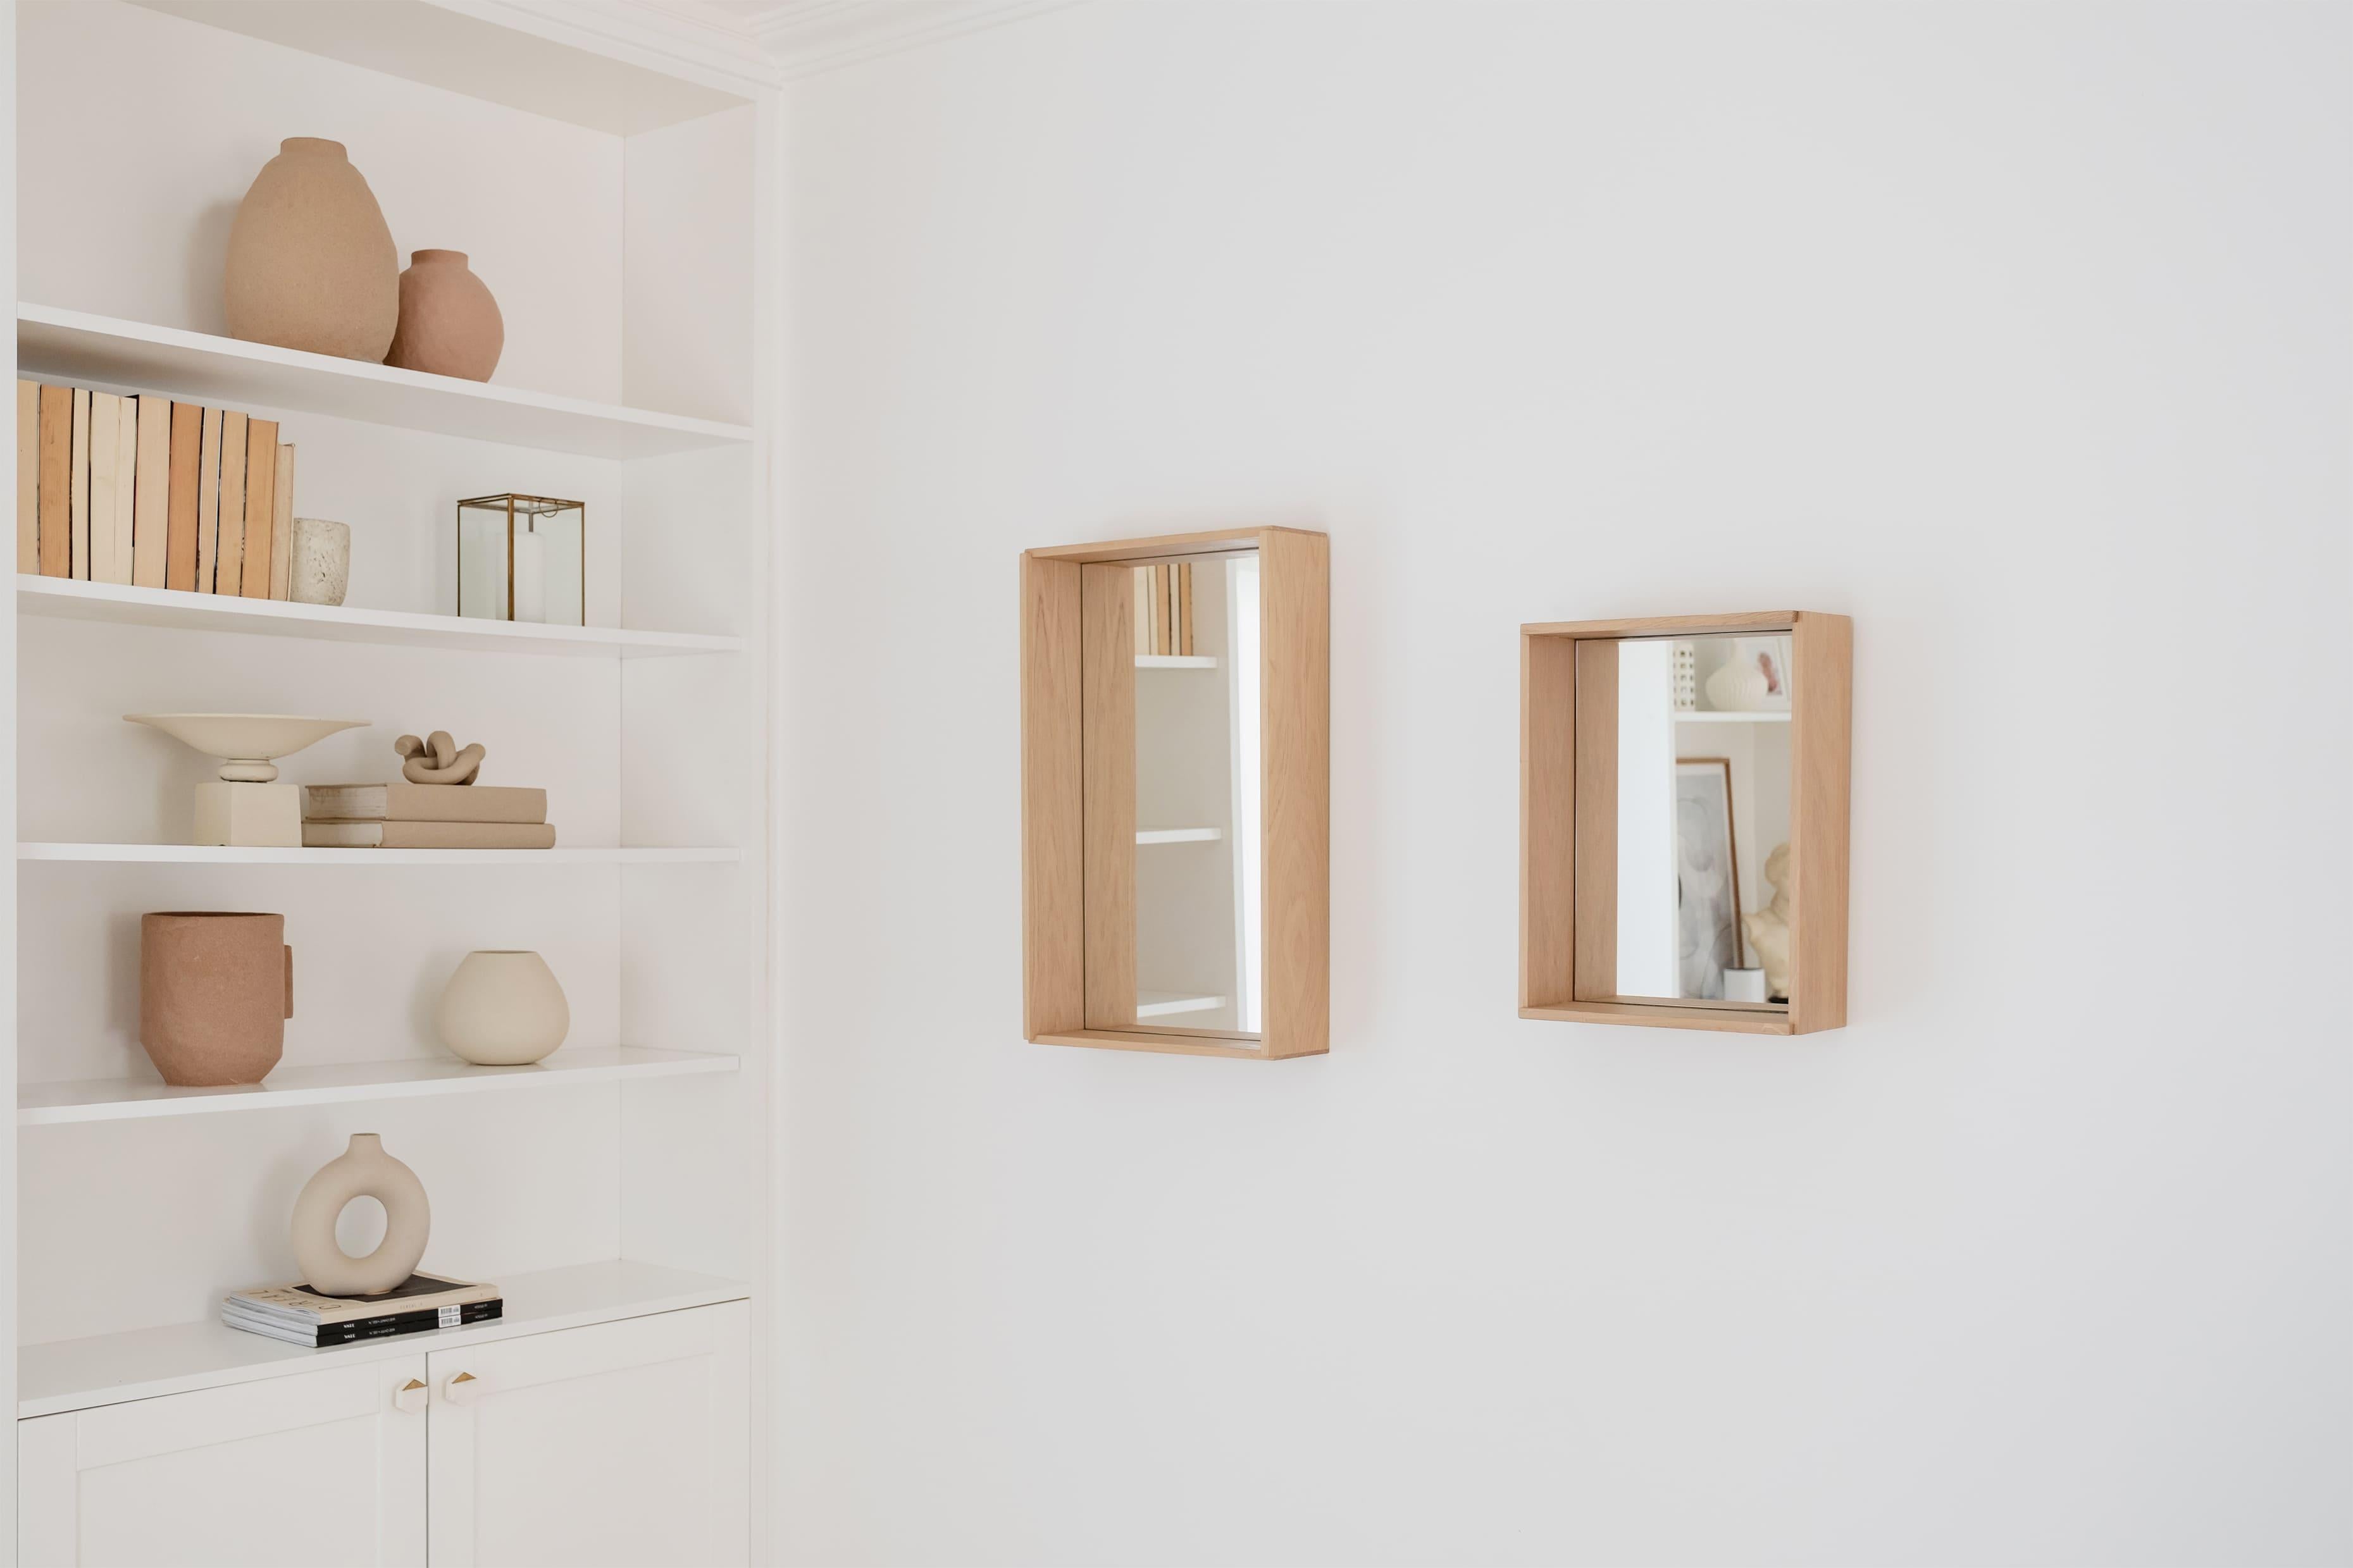 Campo is a multipurpose mirror that opens a window to simple times. A minimal and honest design that offers a variety of uses.

Inspired by traditional wooden cases used in the markets during the early 50’s, CAMPO mirror replicates the functionality